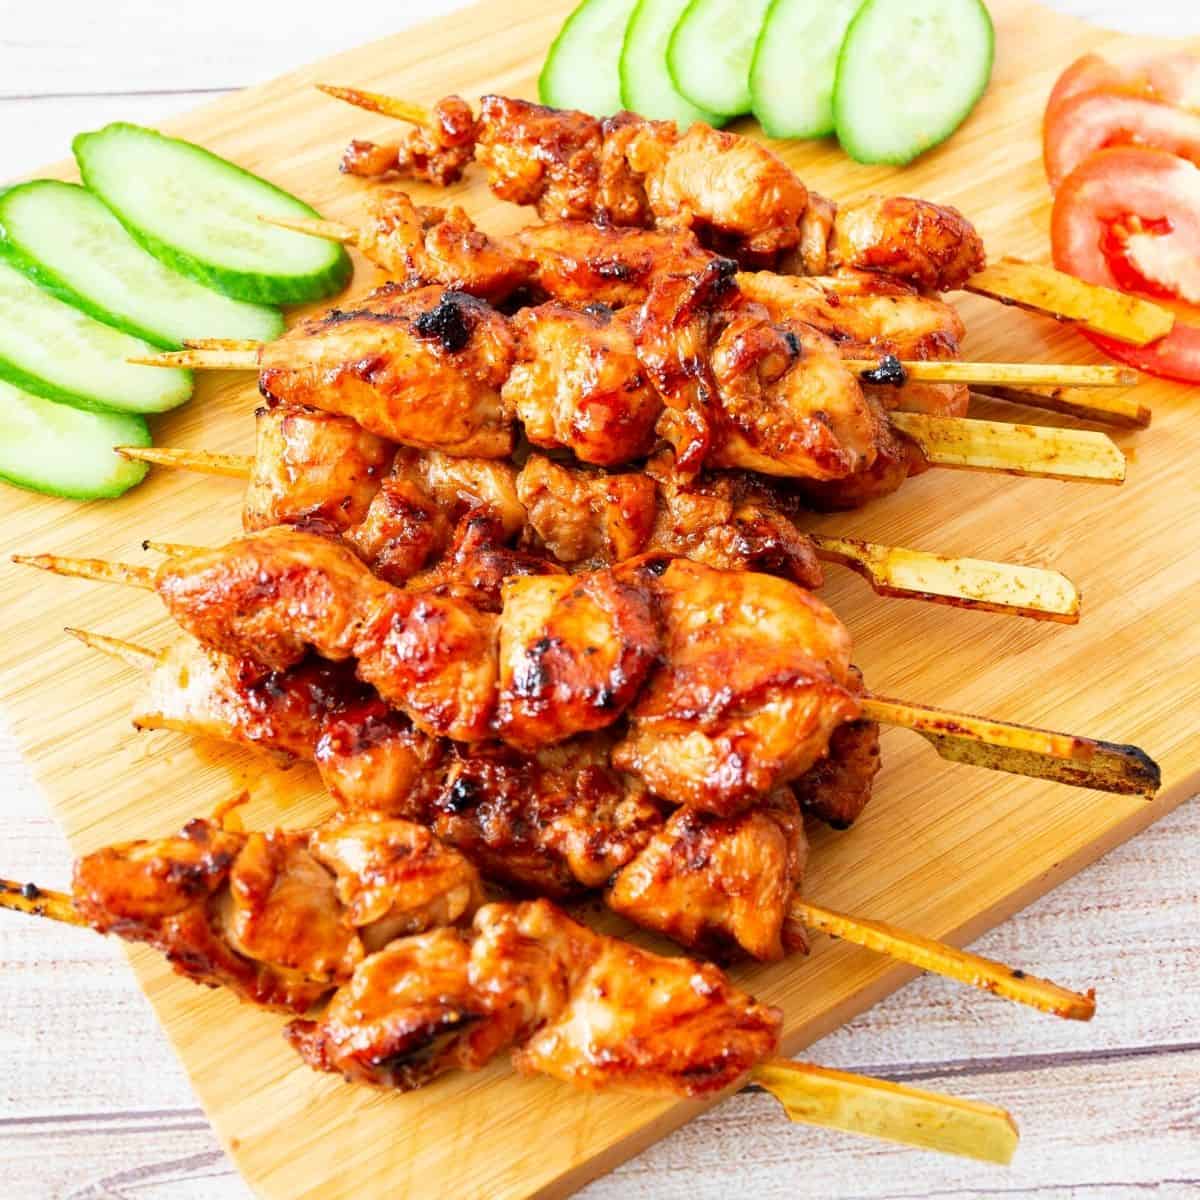 A board with glazed chicken skewers.